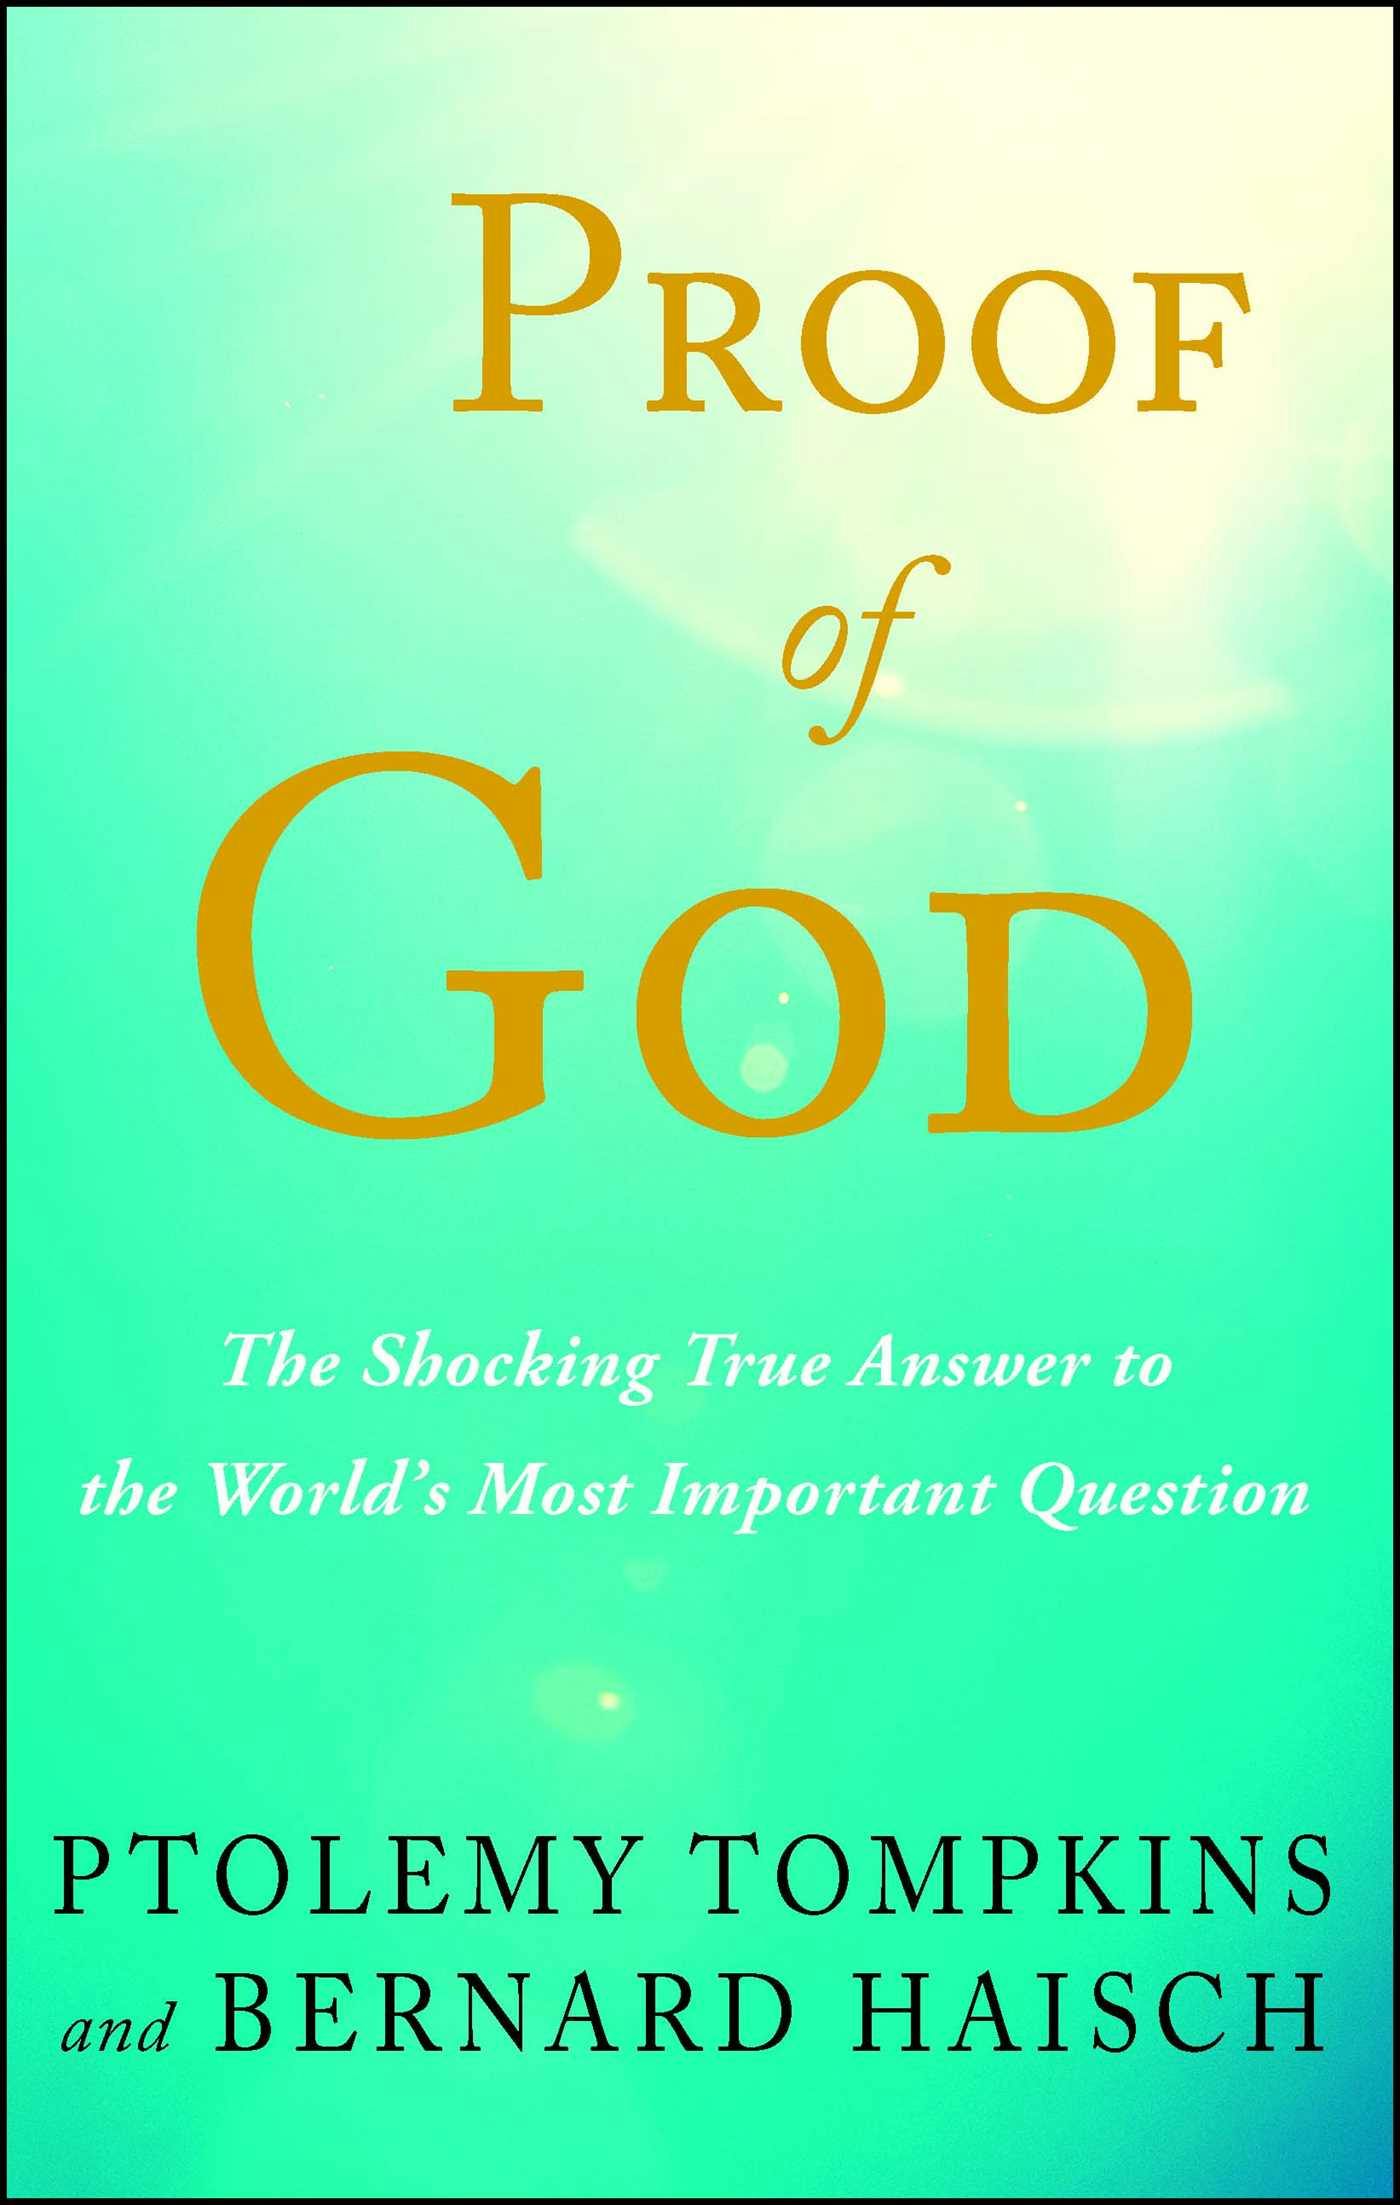 Proof of God: The Shocking True Answer to the World's Most Important Question - Ptolemy Tompkins, Bernard Haisch